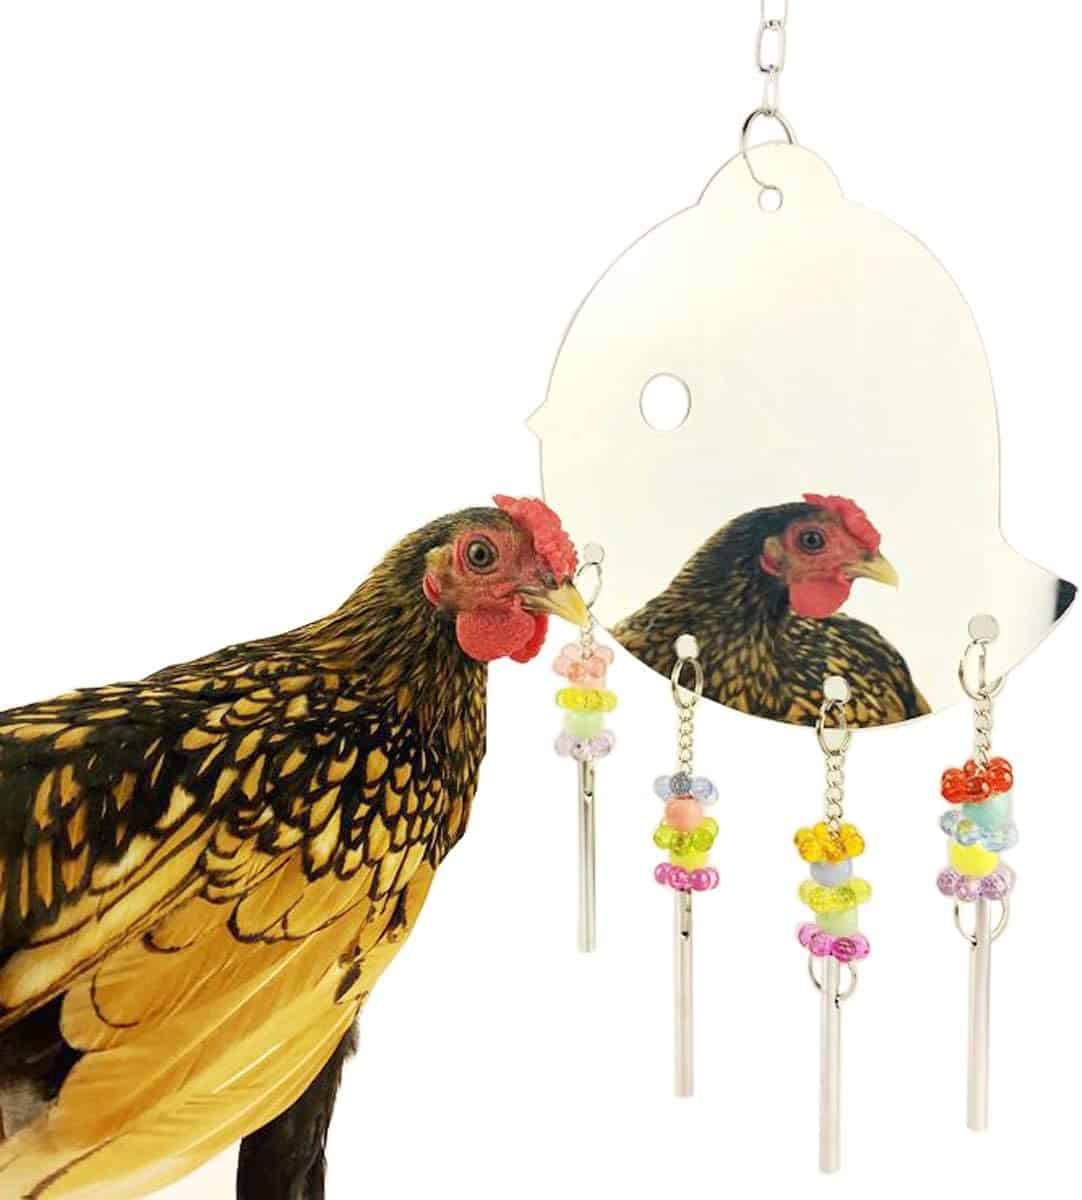 chicken enrichment ideas include a mirror for the chicken coop